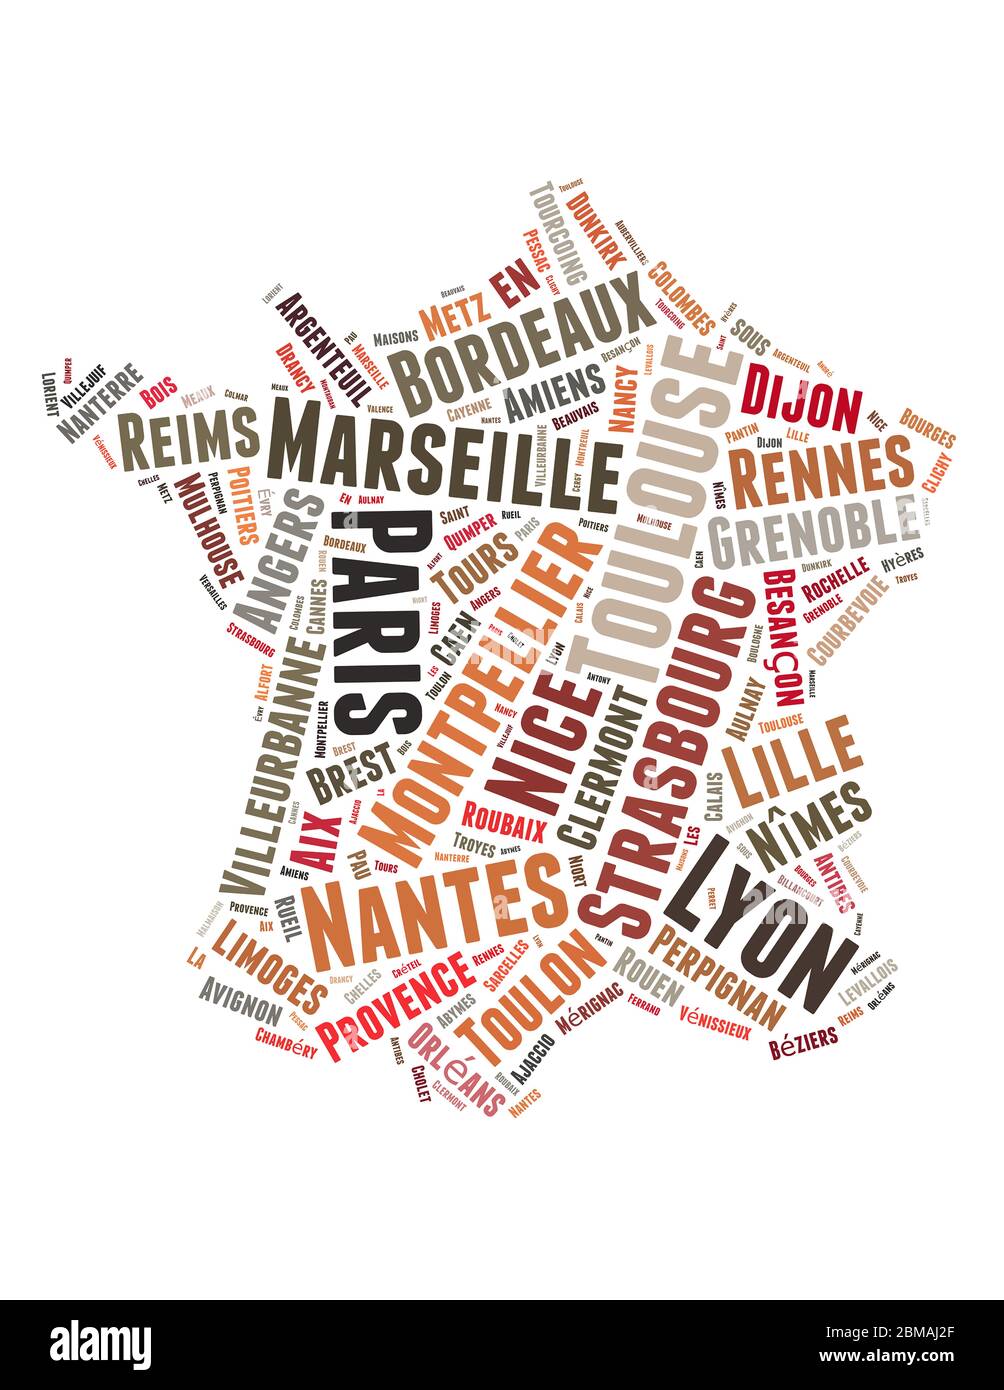 France cities word cloud concept on white background. Stock Photo